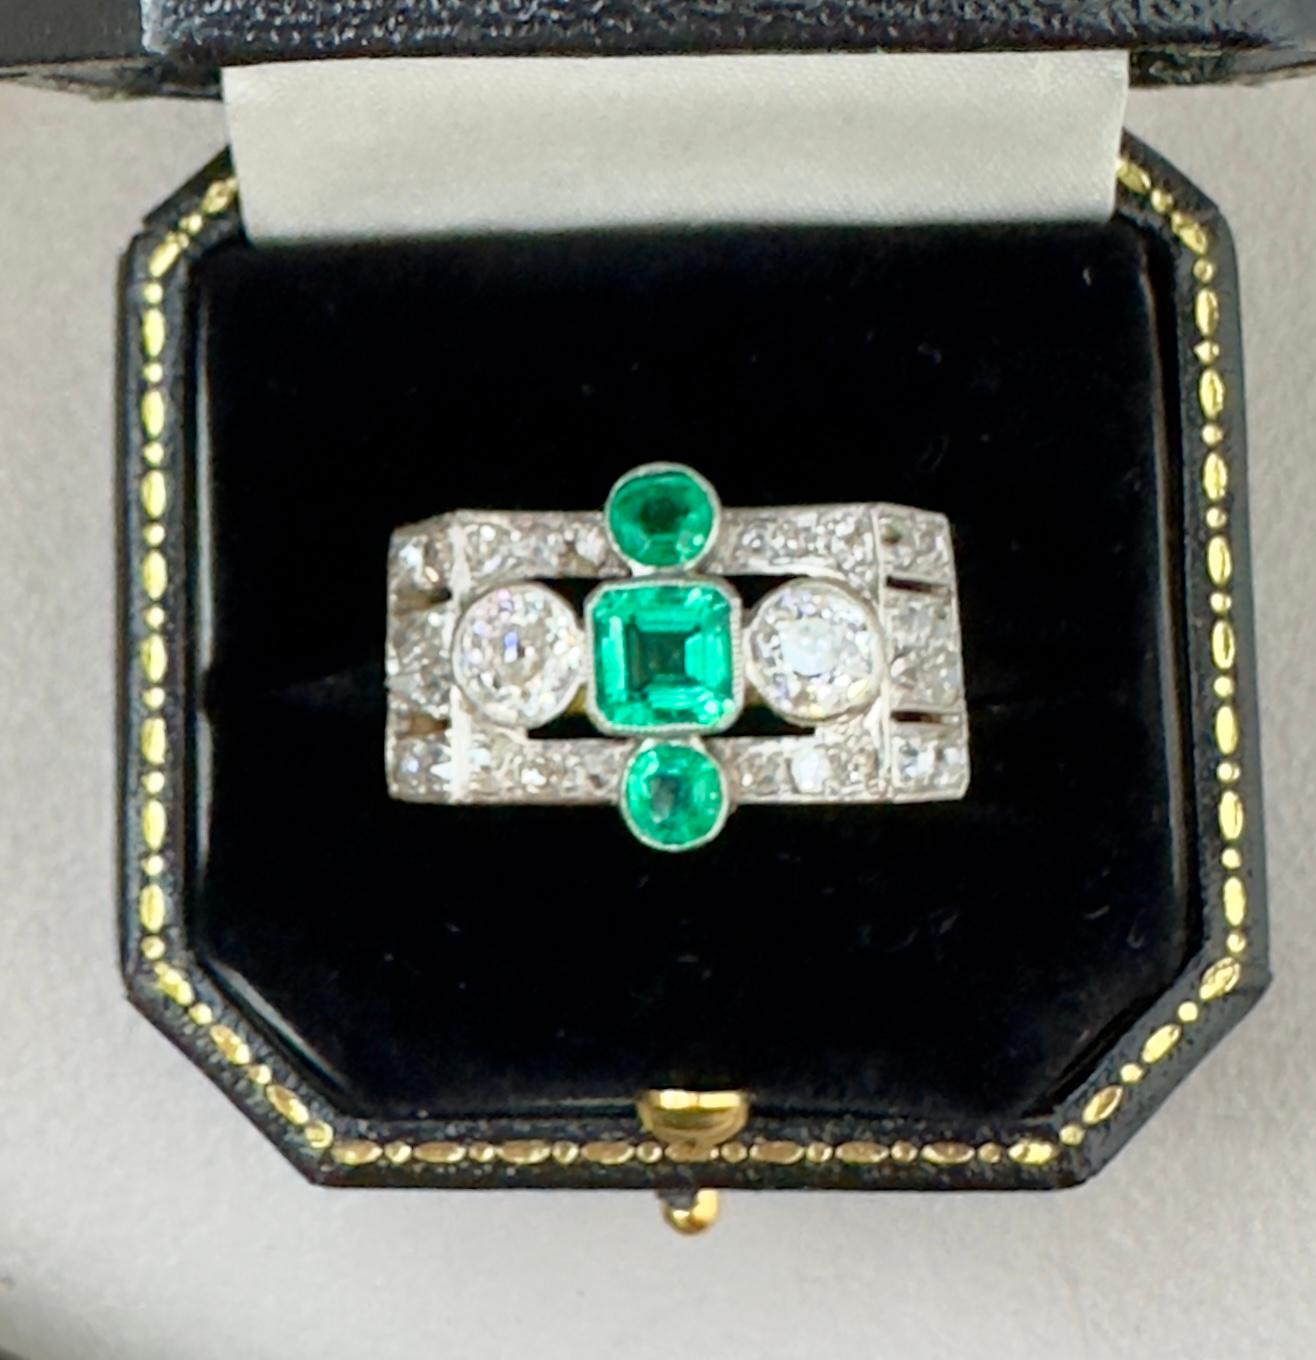 This ring, because of its shape and and war time era ,is called a Tank Ring. They are worn by both men and women and have a distinctive shape. This ring is set with exceptional deep green emeralds and various shapes of white diamonds.The two round